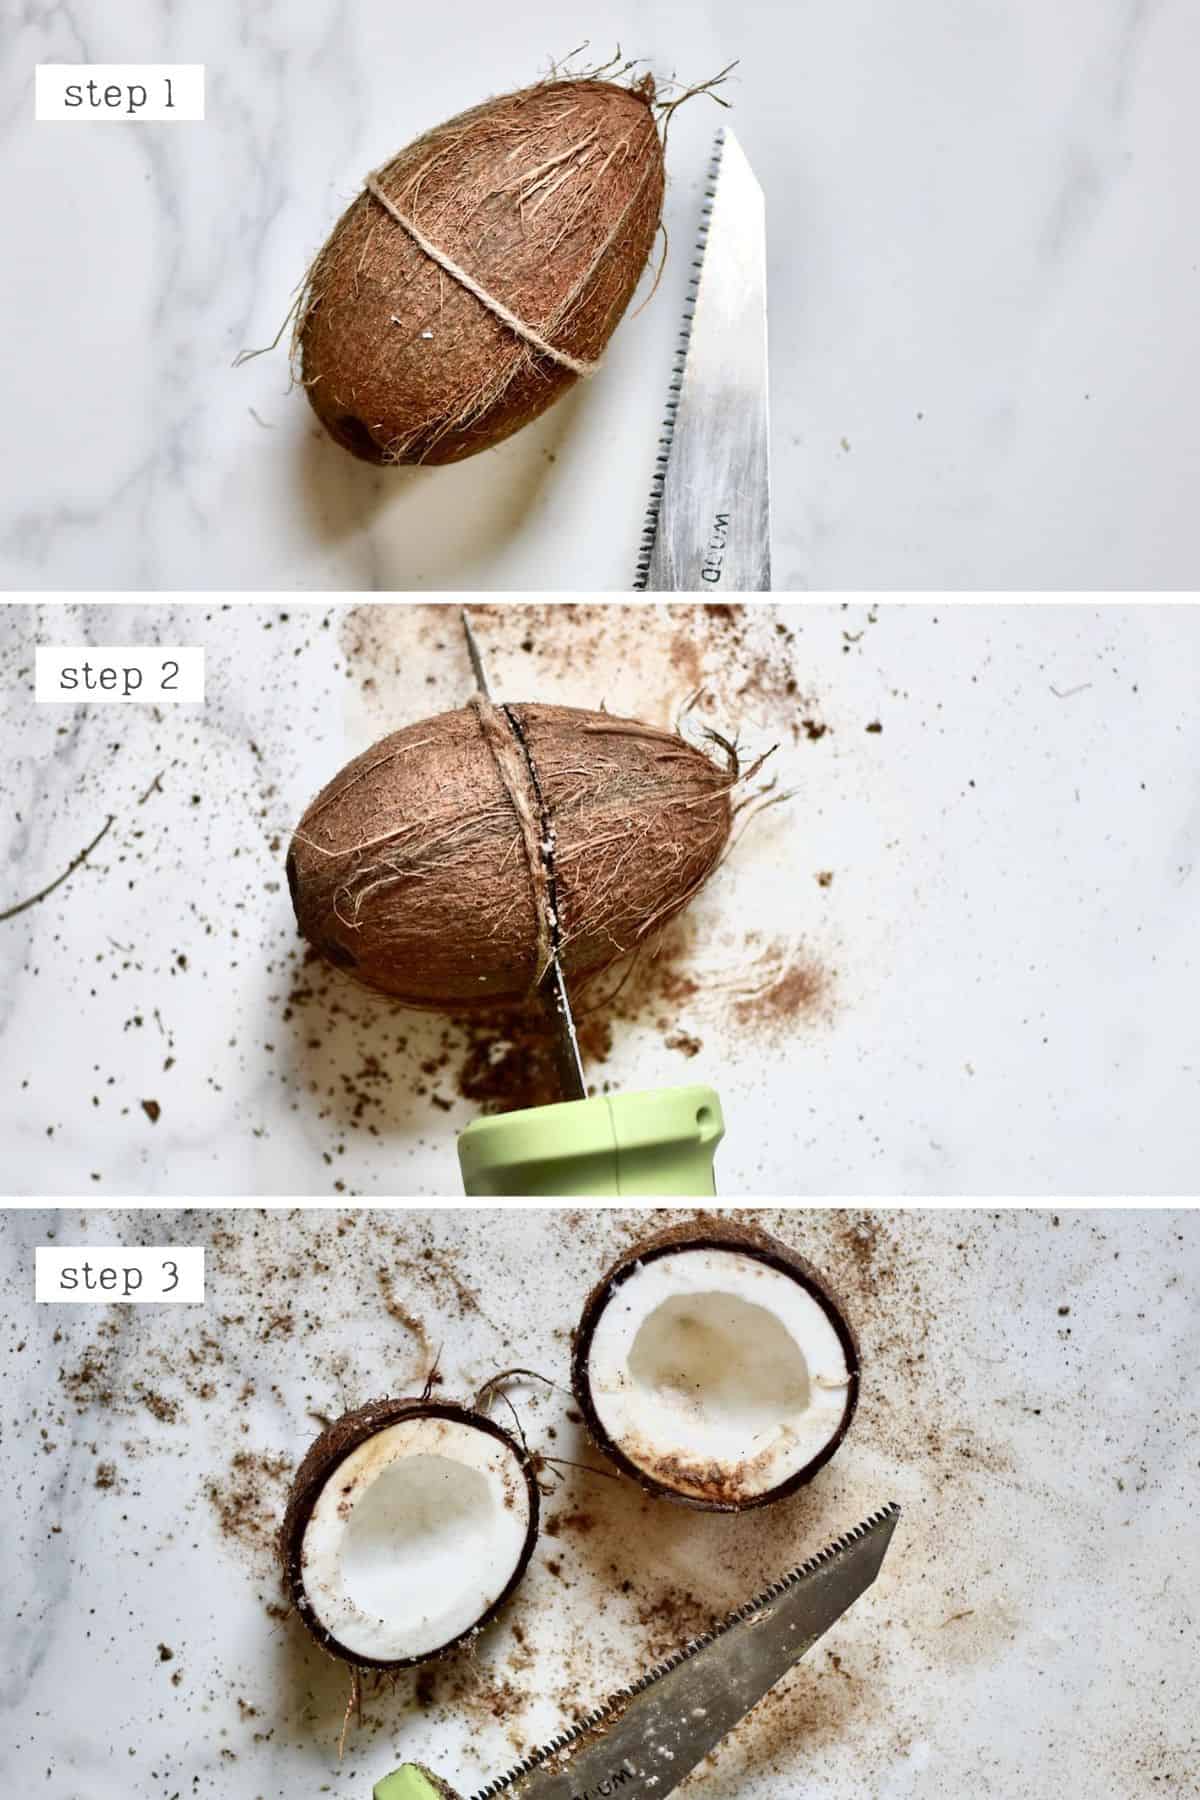 Steps of opening a coconut using a saw